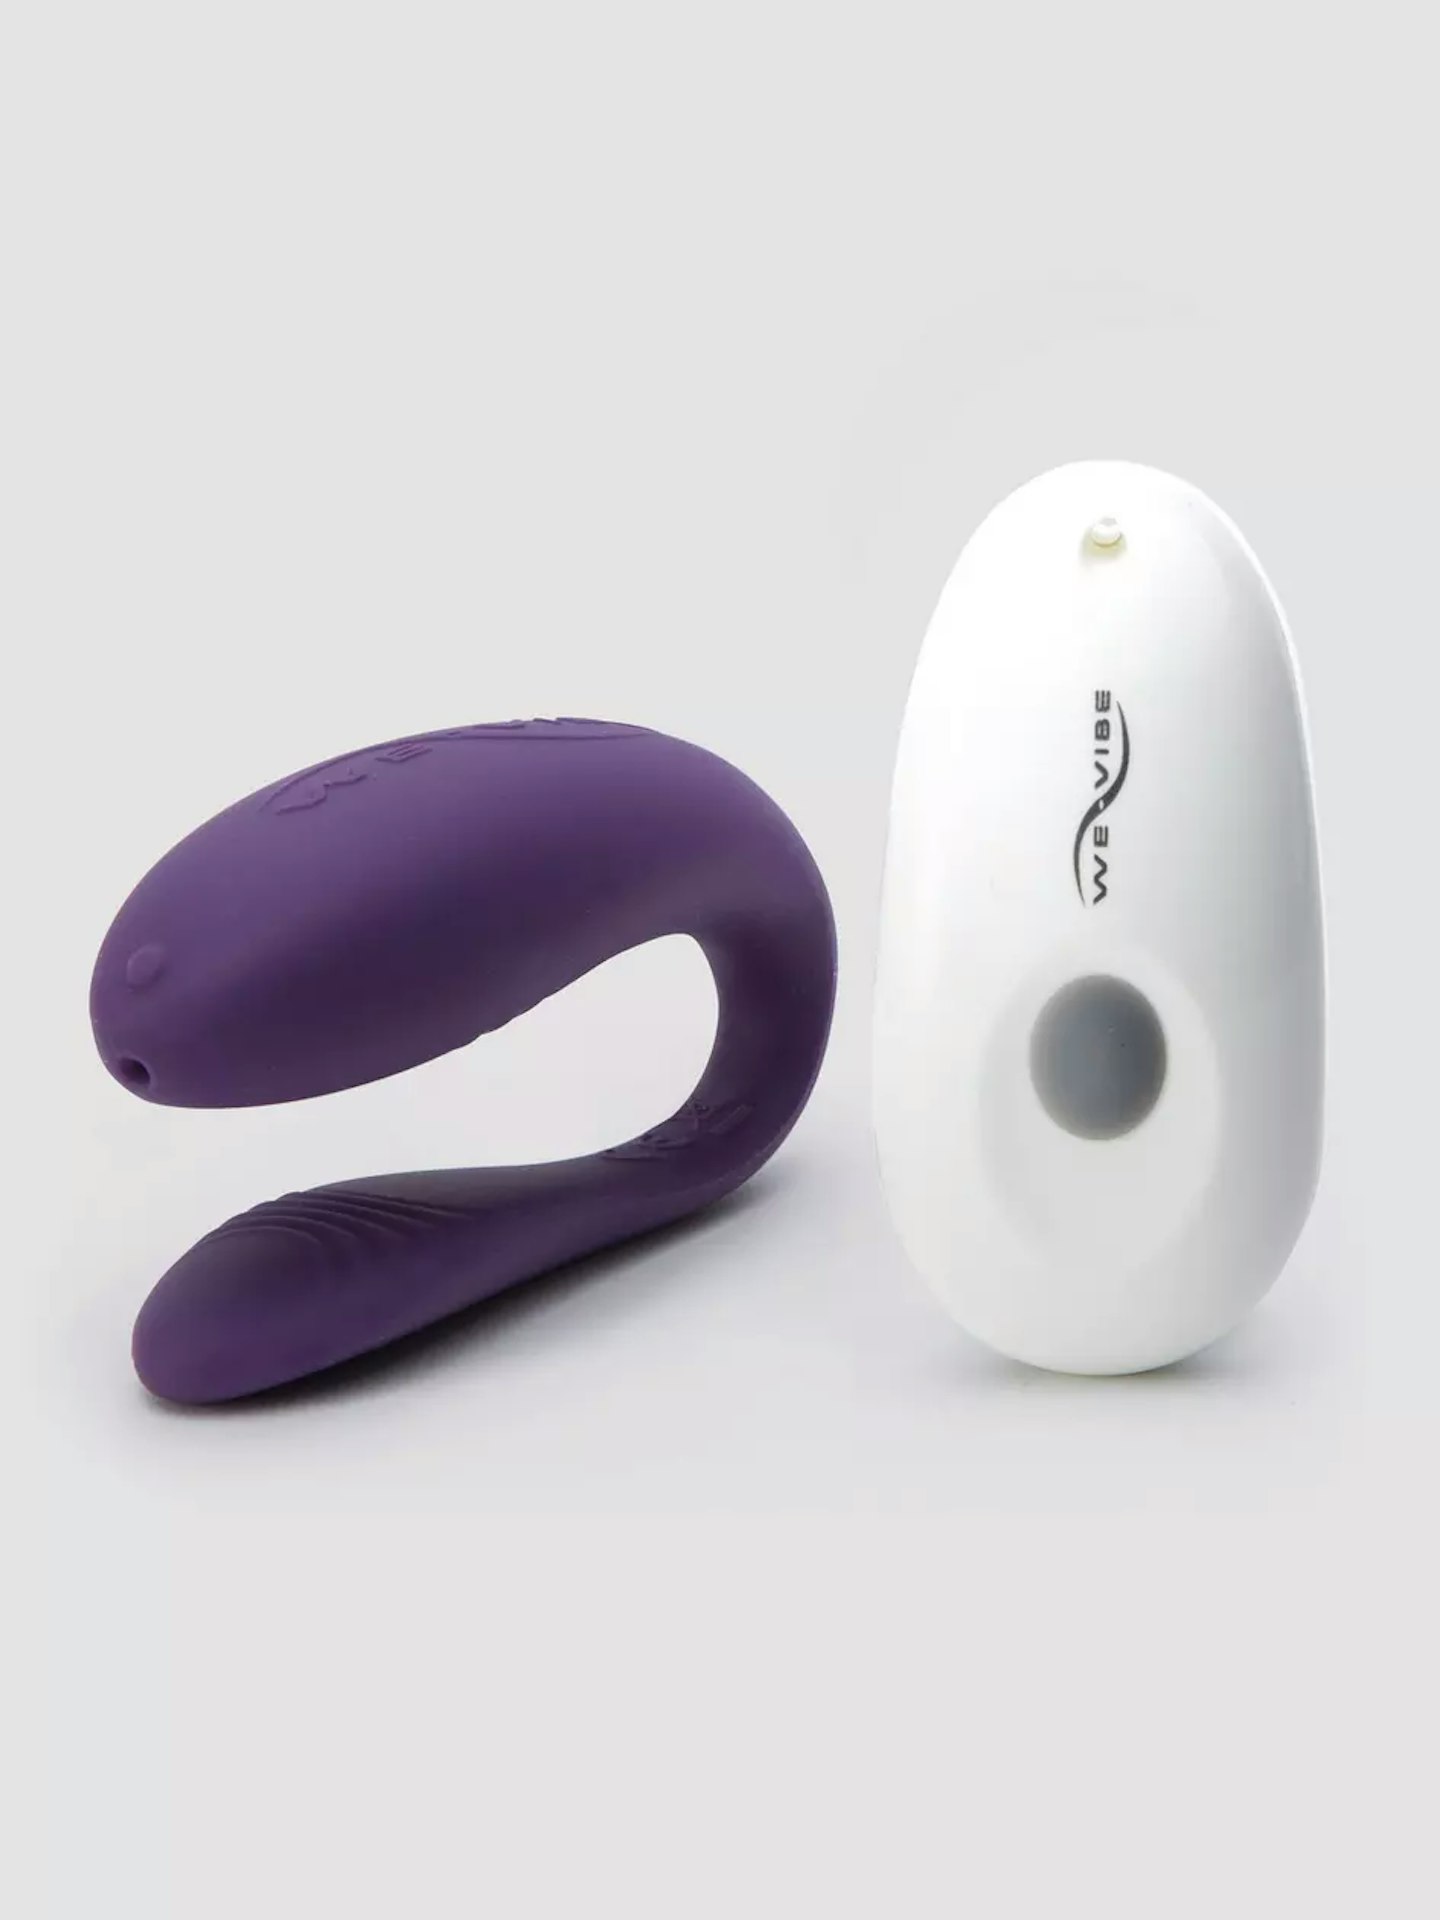 We-Vibe Unite 2 Remote Control Rechargeable Clitoral and G-Spot Vibrator